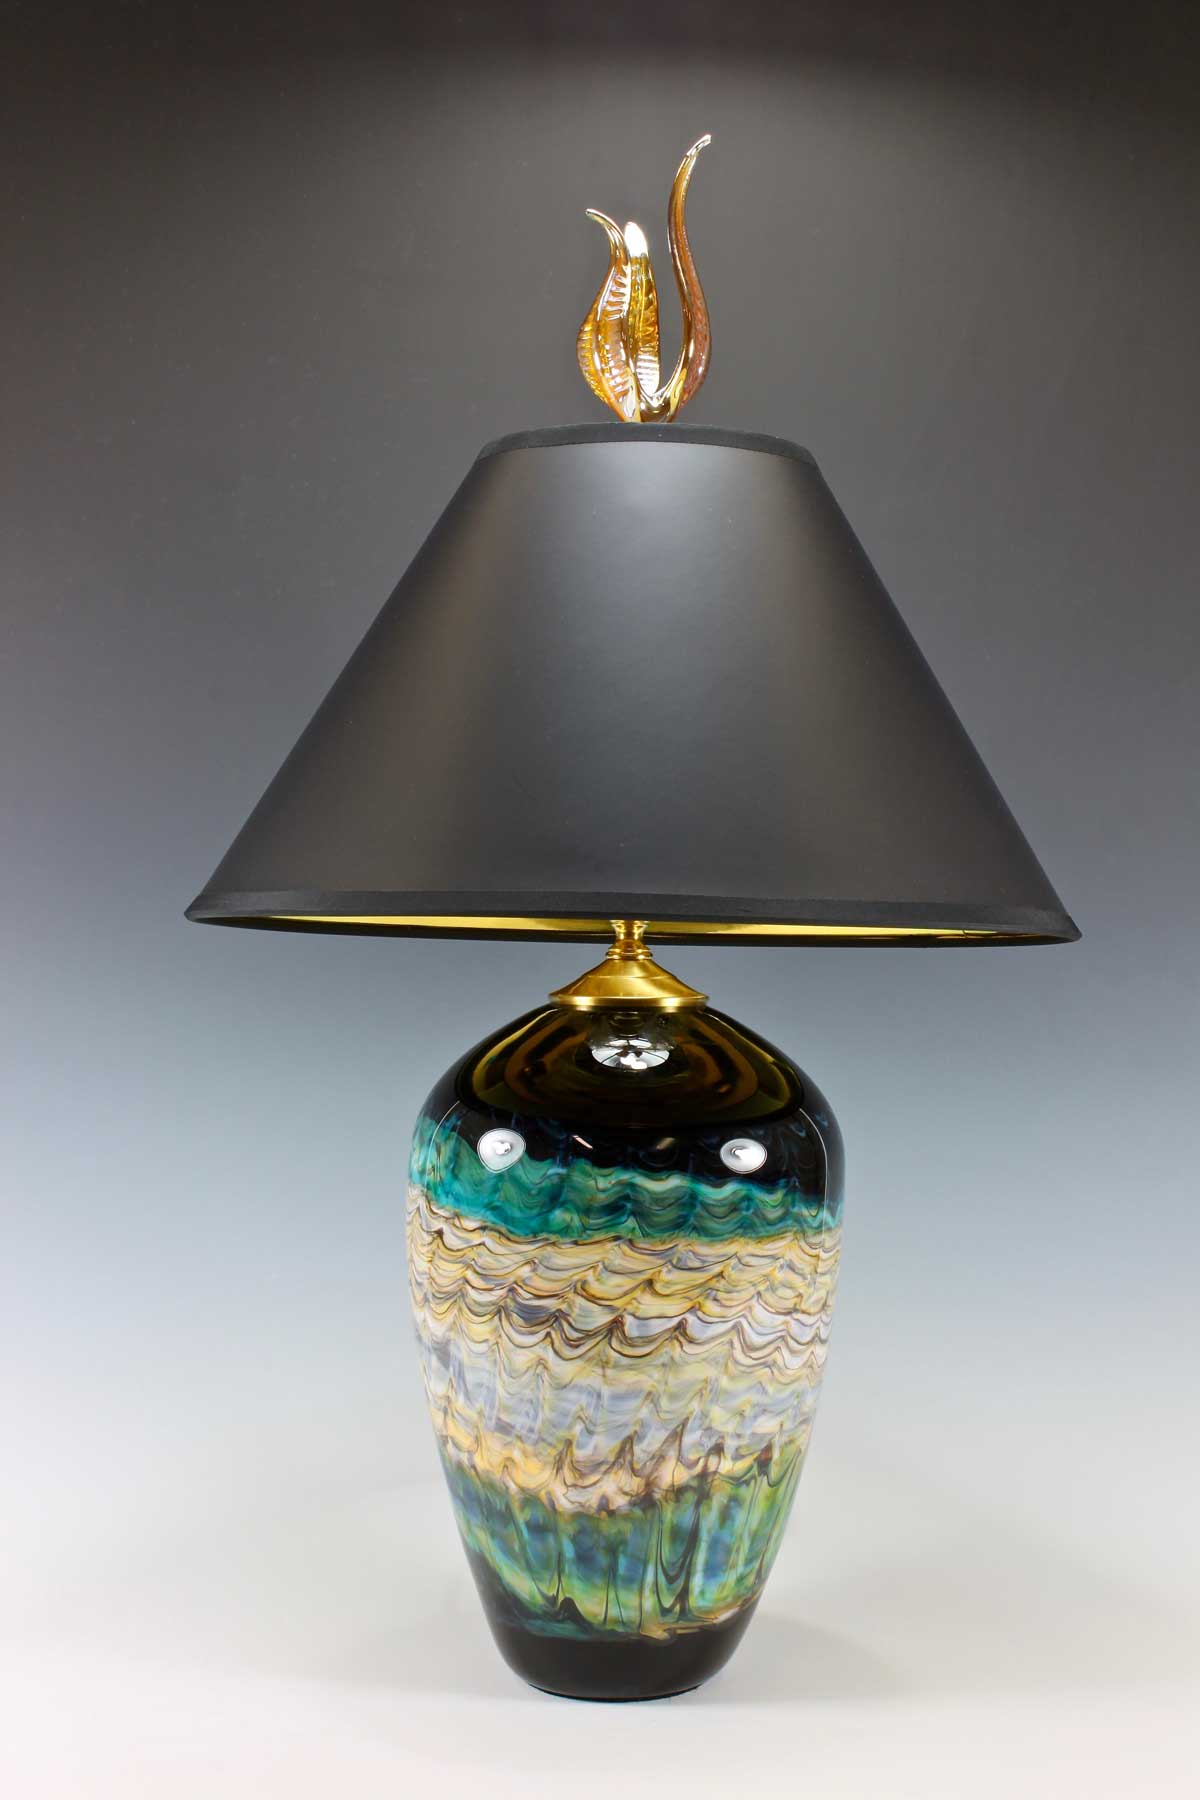 Black-Opal-Turquoise-Table-Lamp-with-Tulip-Finial-Danielle-Blade-and-Stephen-Gartner-Eclipse-Gallery